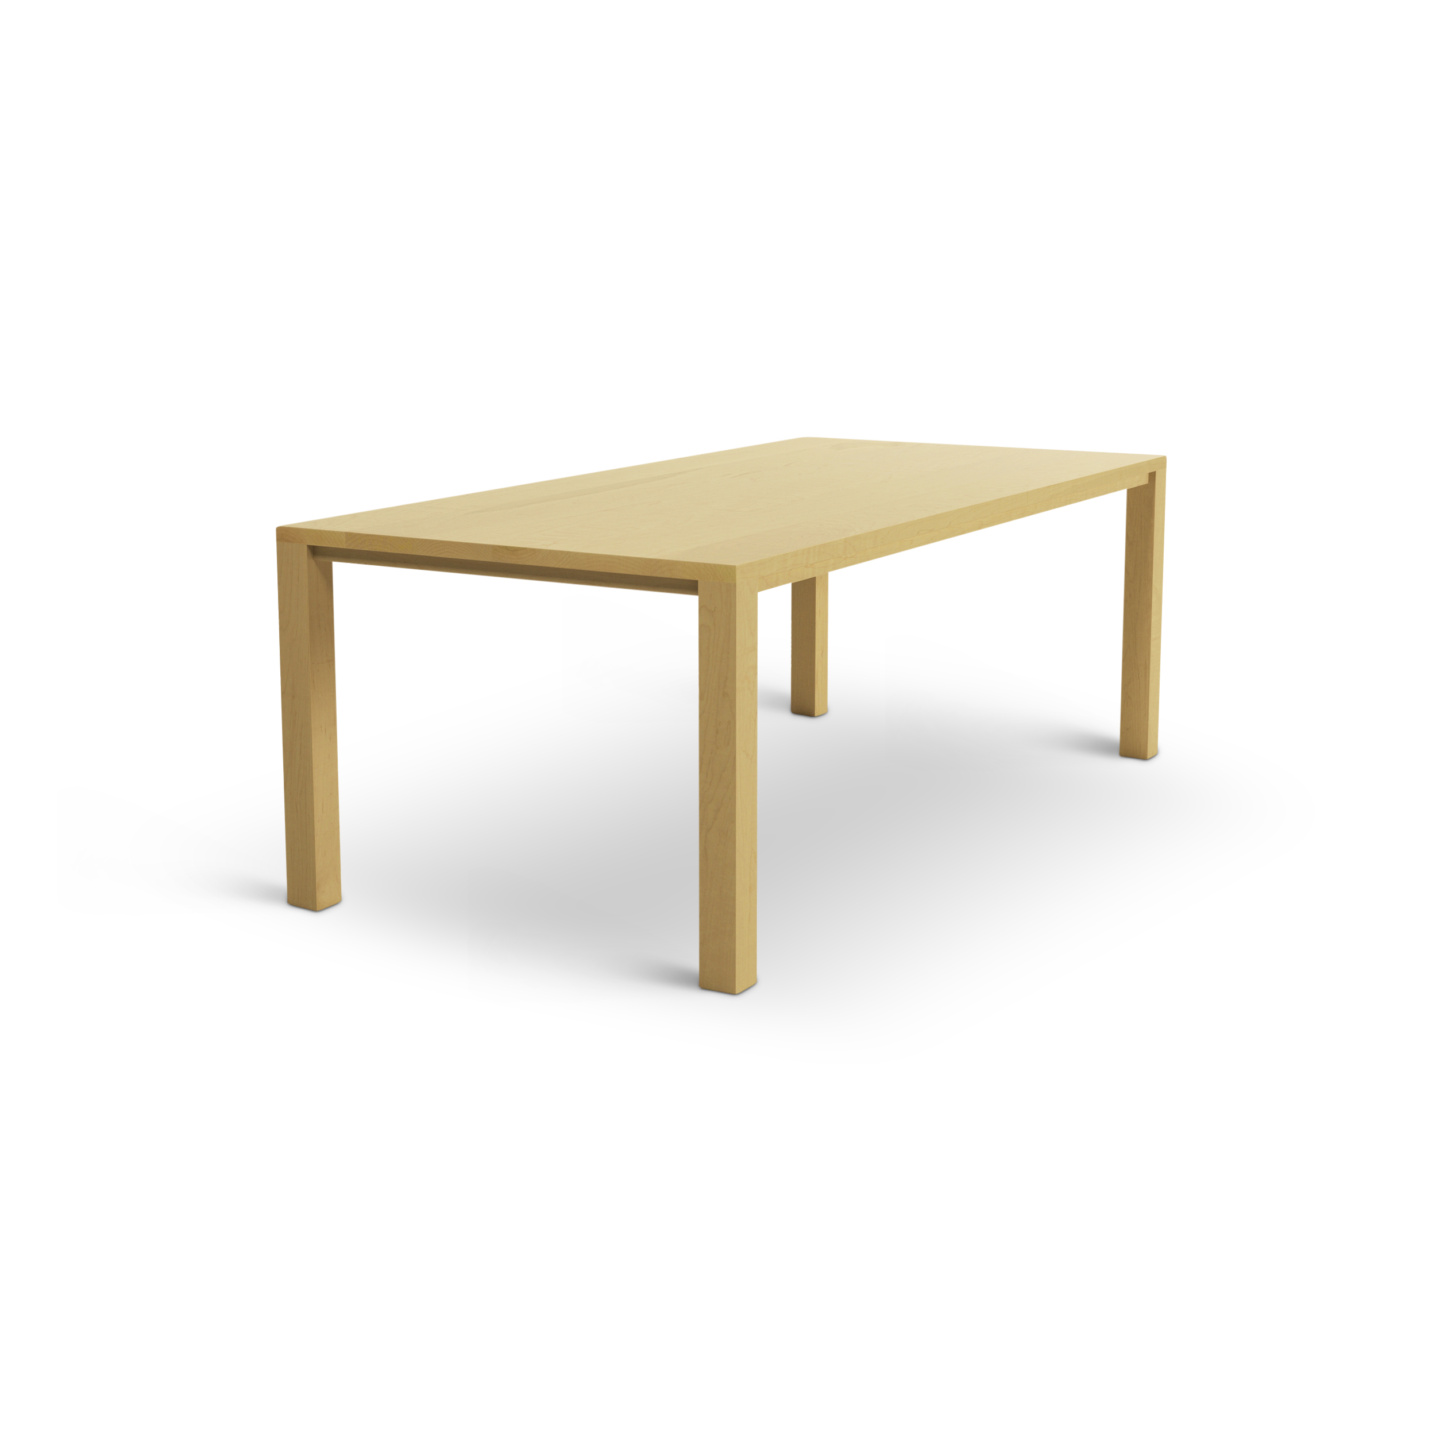 Maple modern table made in the midwest with square legs